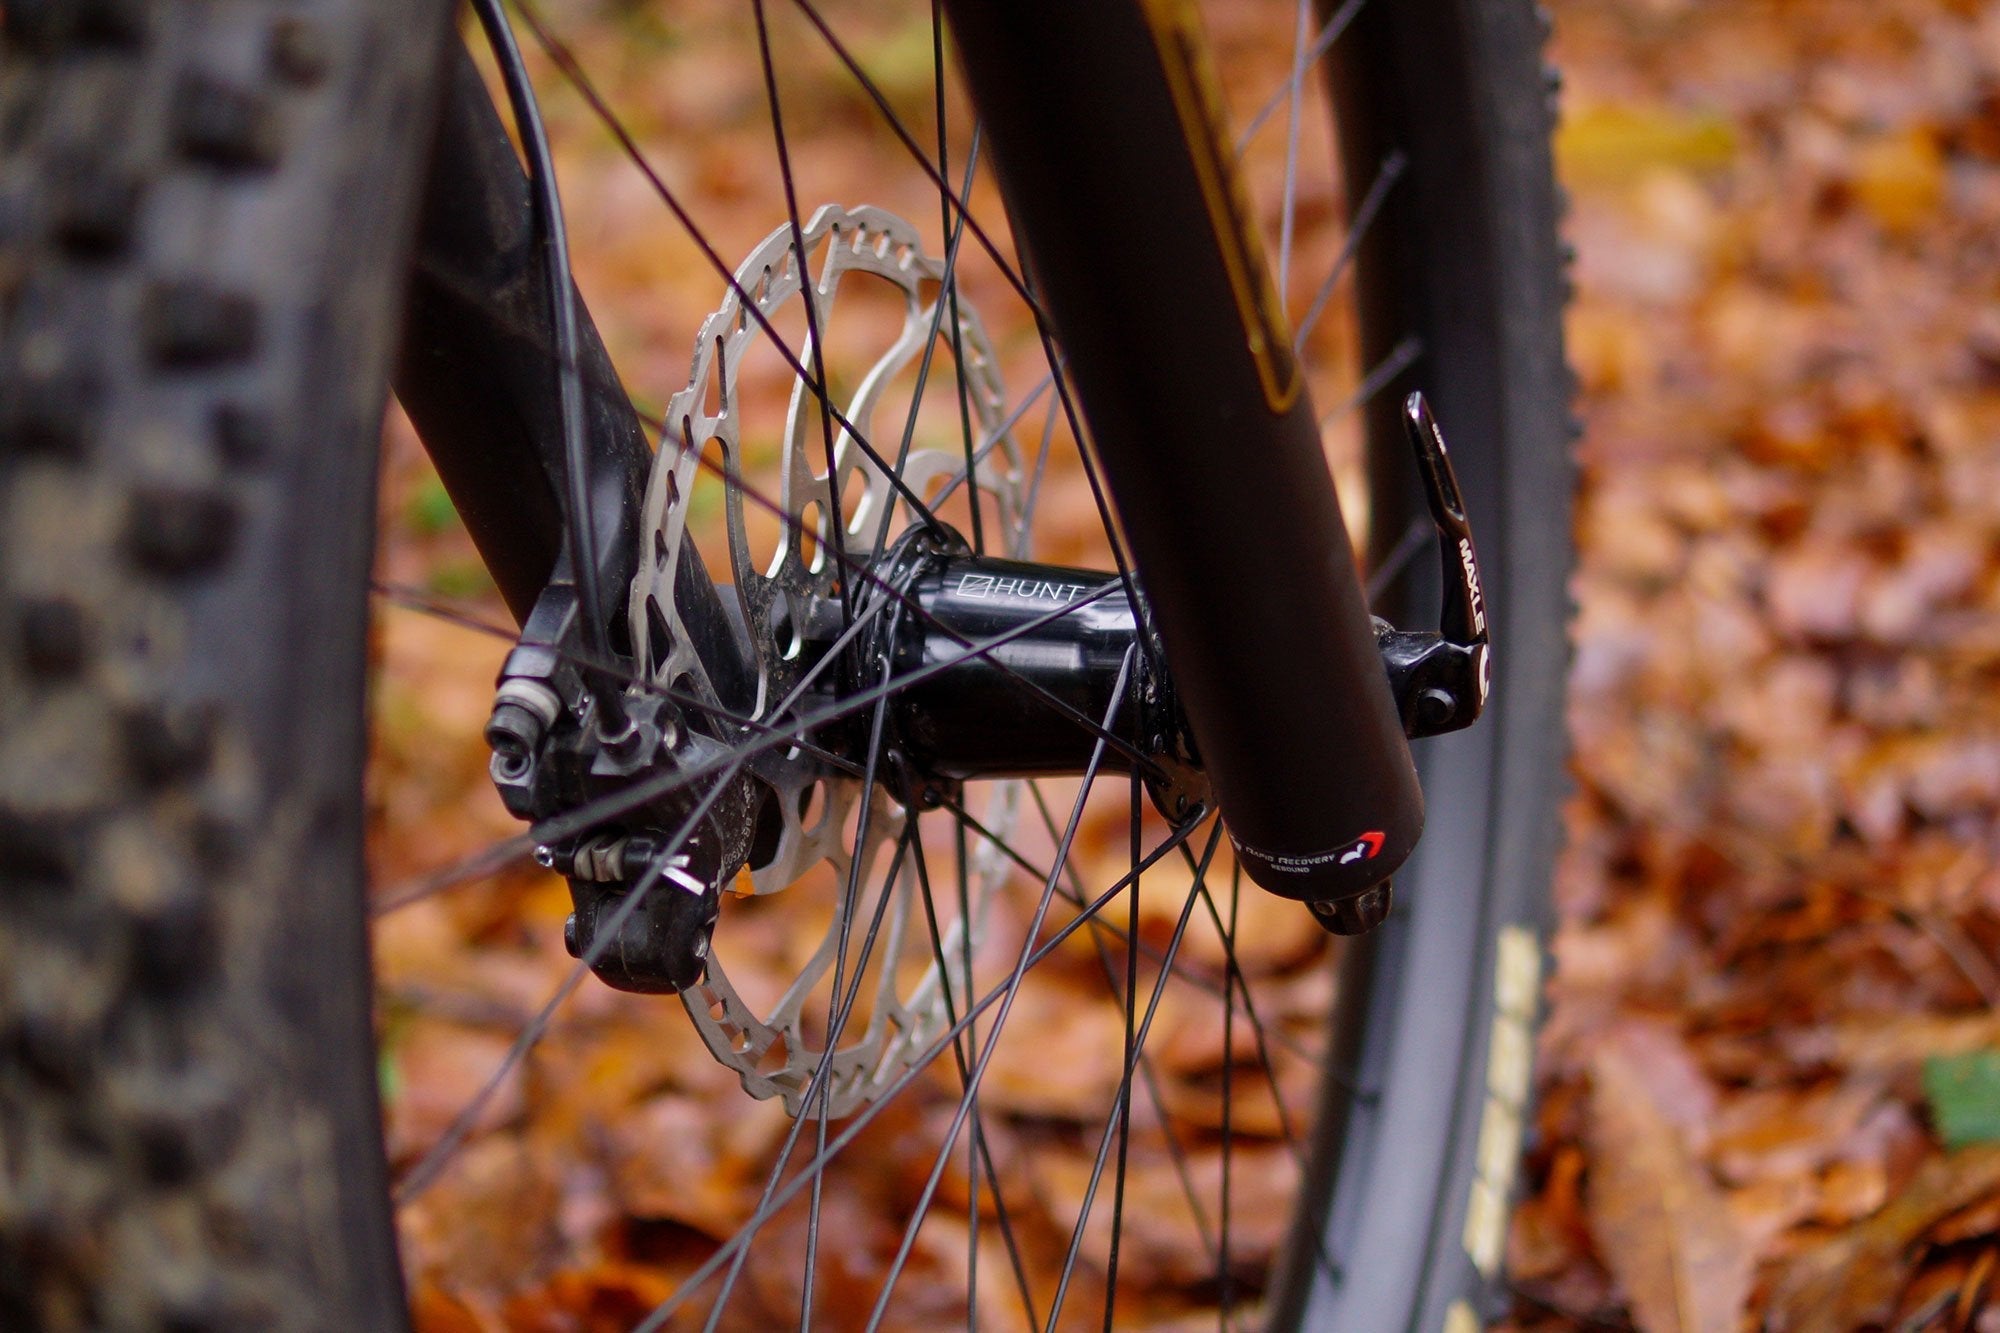 <html><h1>A 'Wheel System' Approach</h1><i>Much like your drive chain or suspension, we see a wheelset to be a system of the bicycle in itself. How we chose to go about designing the ride quality, durability and serviceability were our main priorities - Like it should always be.</i></html>